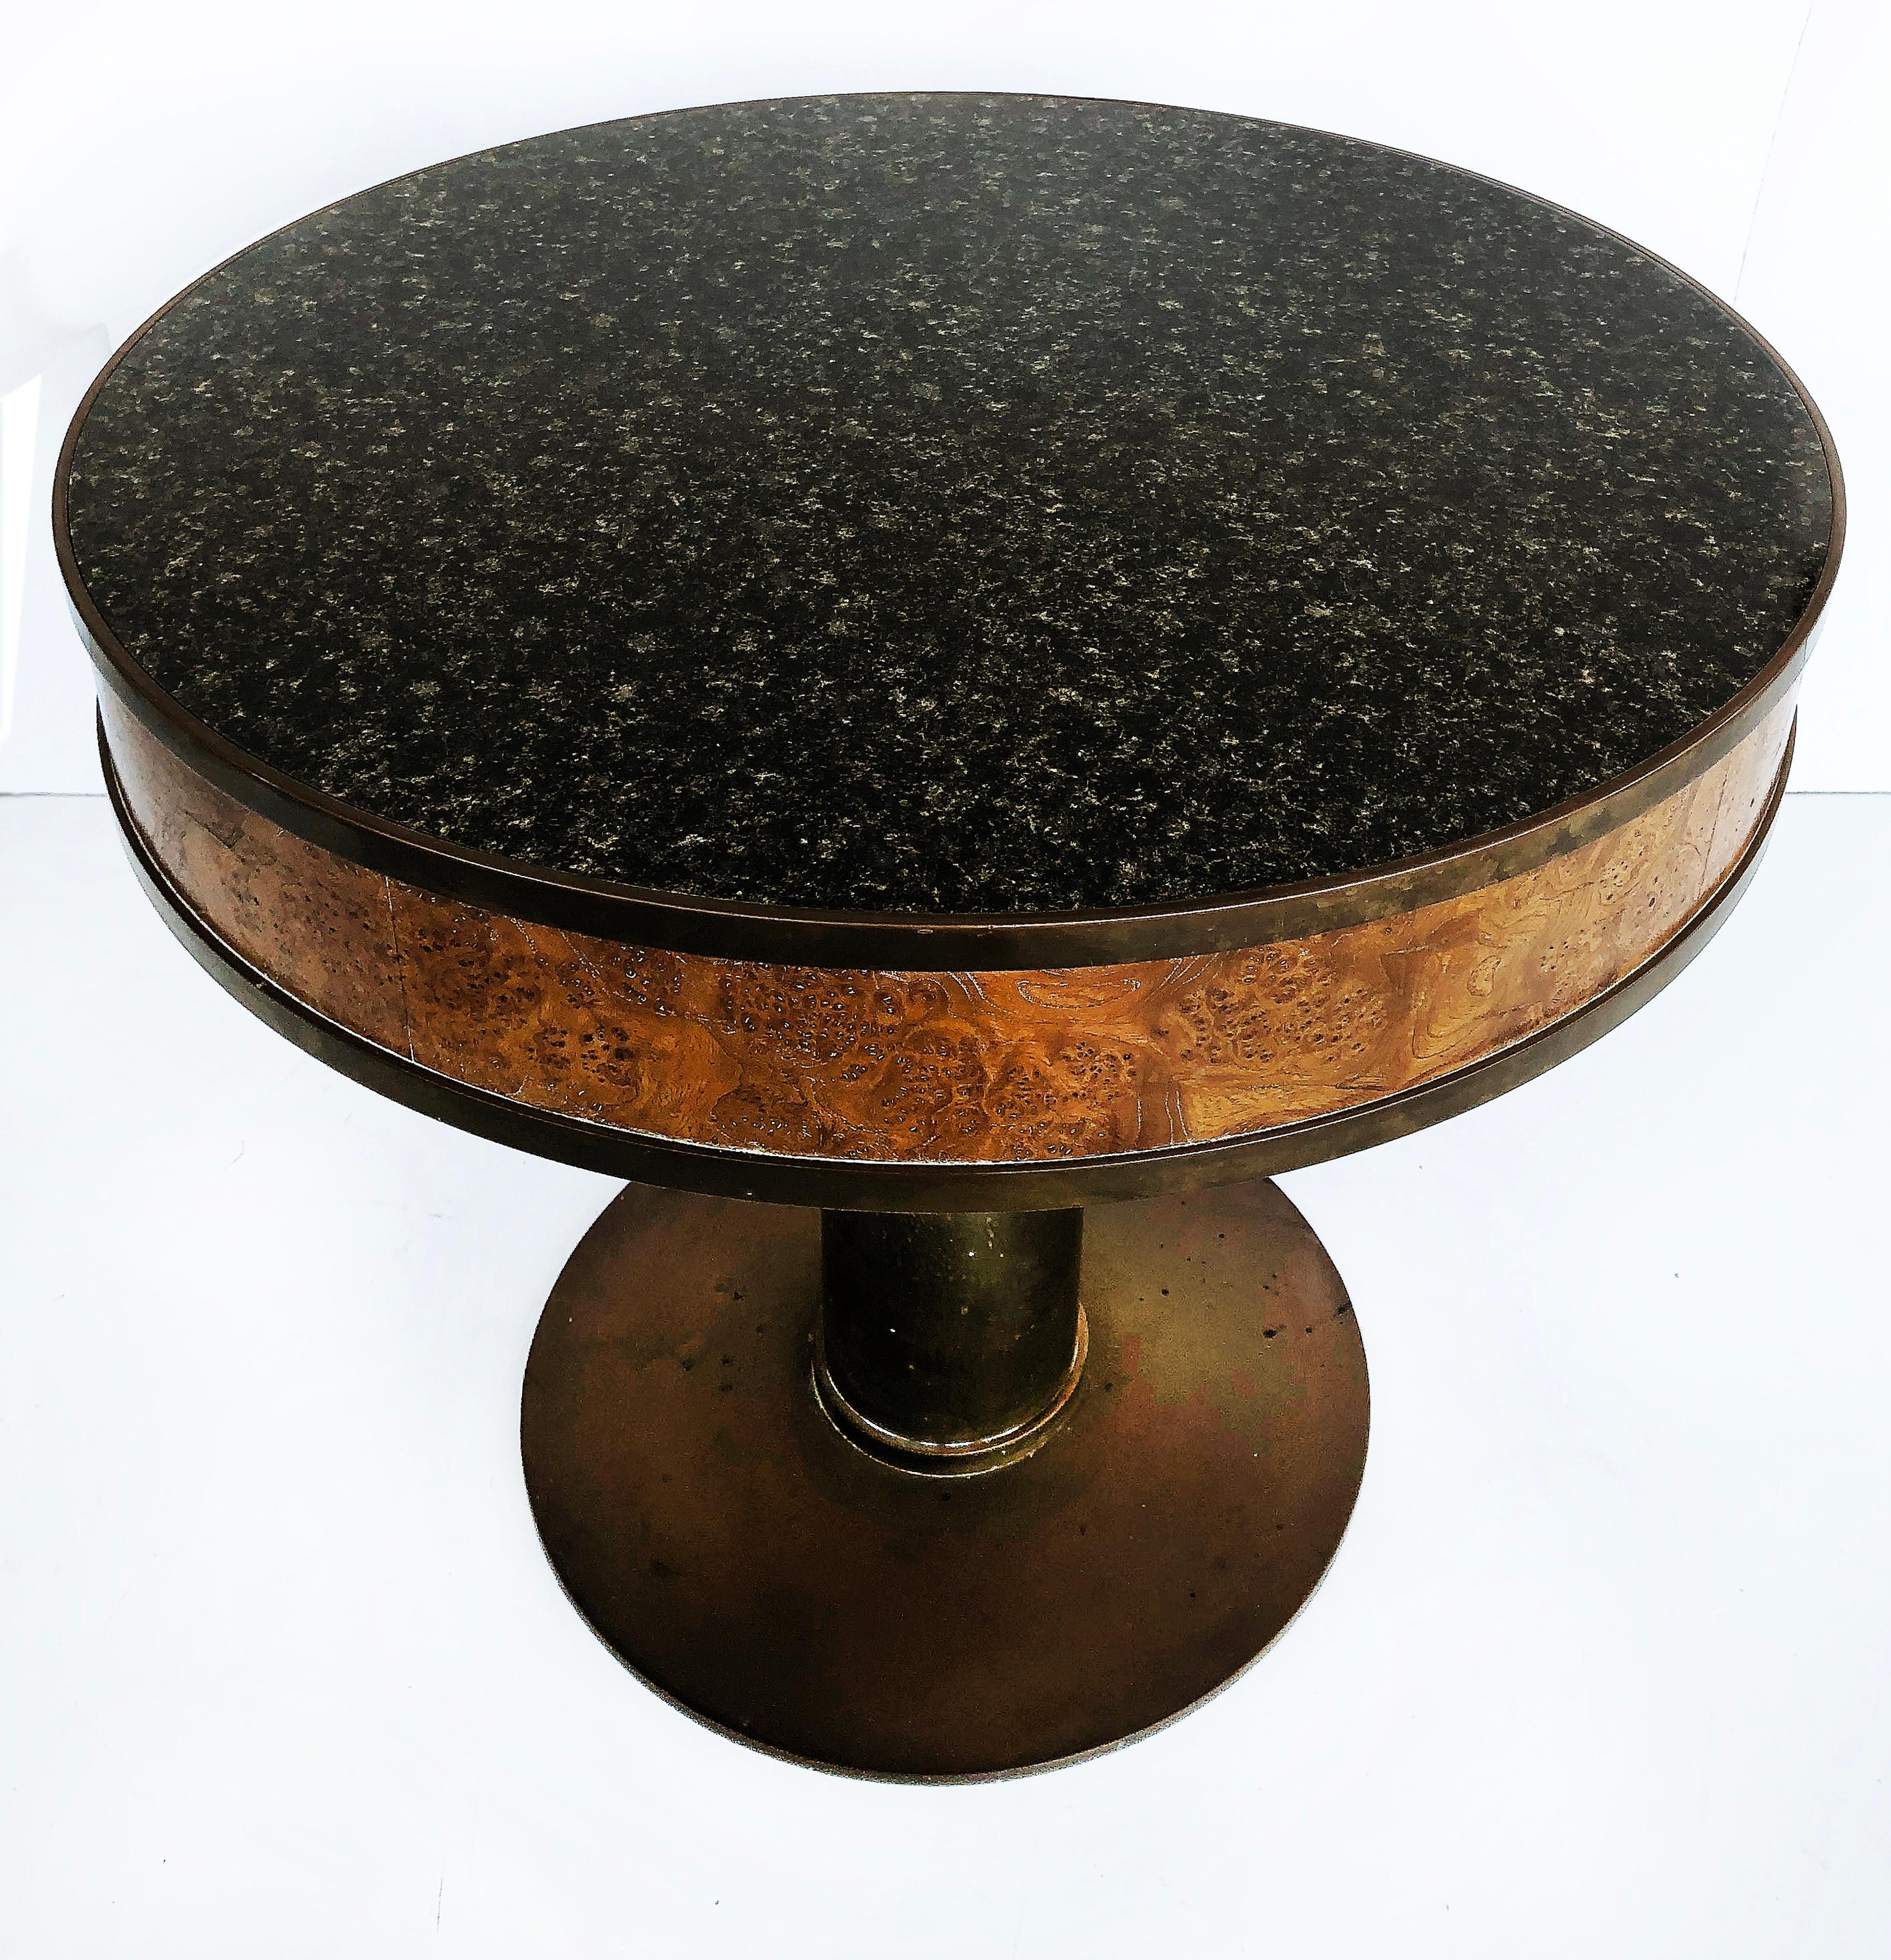 Bronze Burl Pedestal Gueridon side table with Faux Granite Laminate top

Offered for sale is a bronze and burl wood pedestal side table or gueridon with an inset faux granite laminate top. The burl wood table apron is surrounded top and bottom